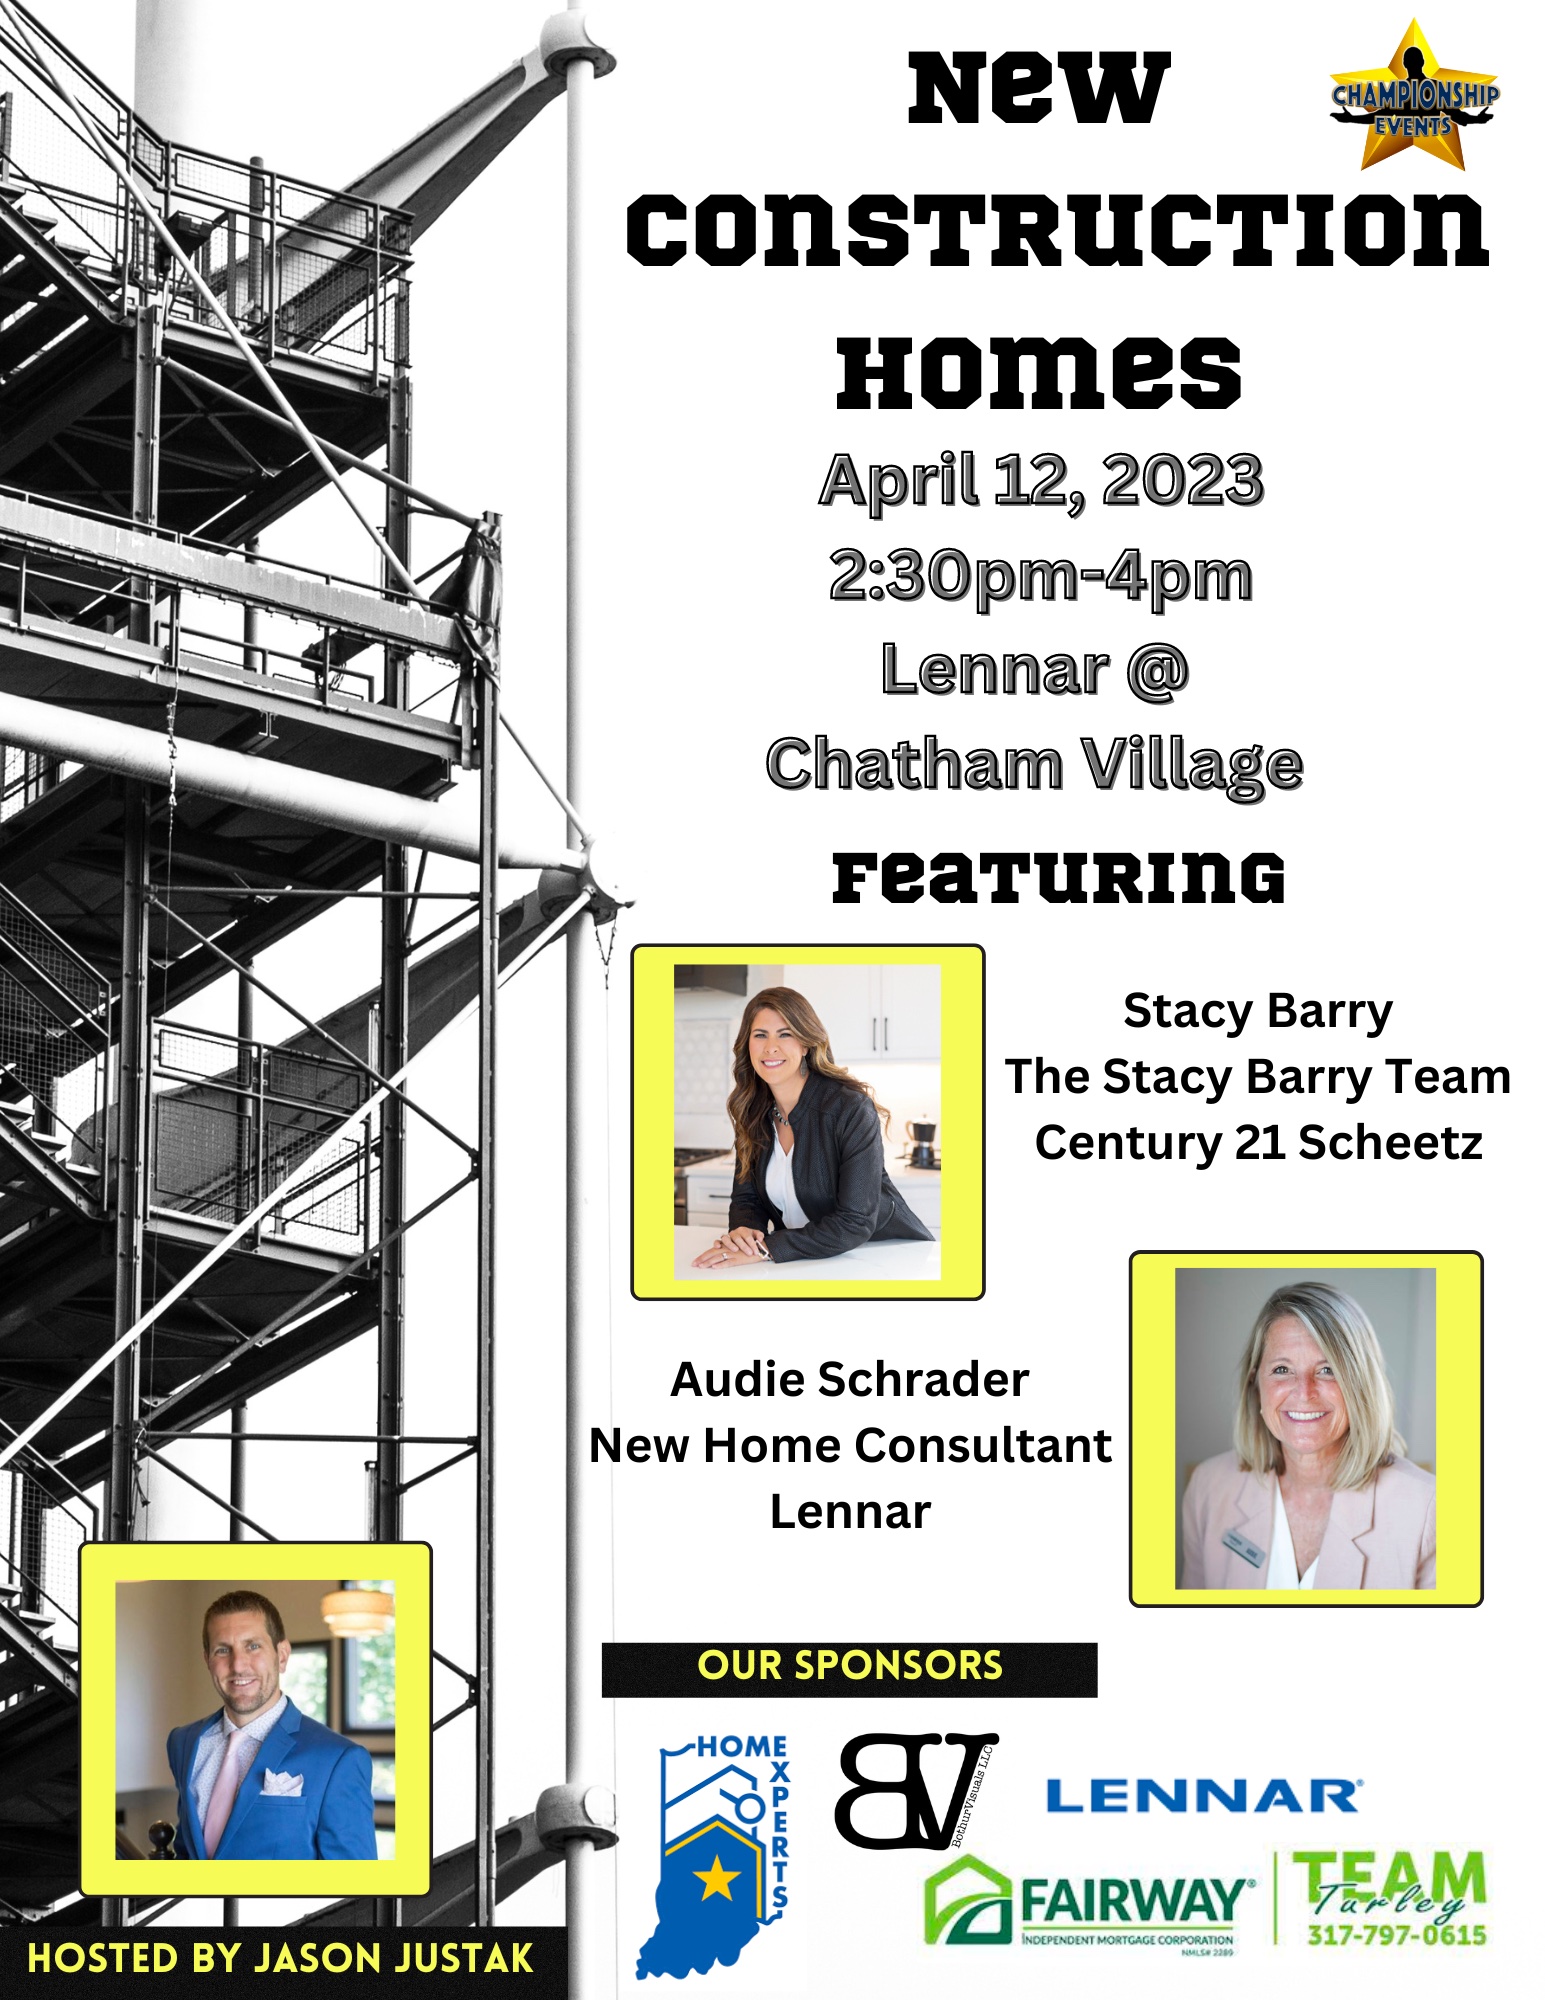 New Construction Homes: Featuring Stacy Barry, Carmel Realtor